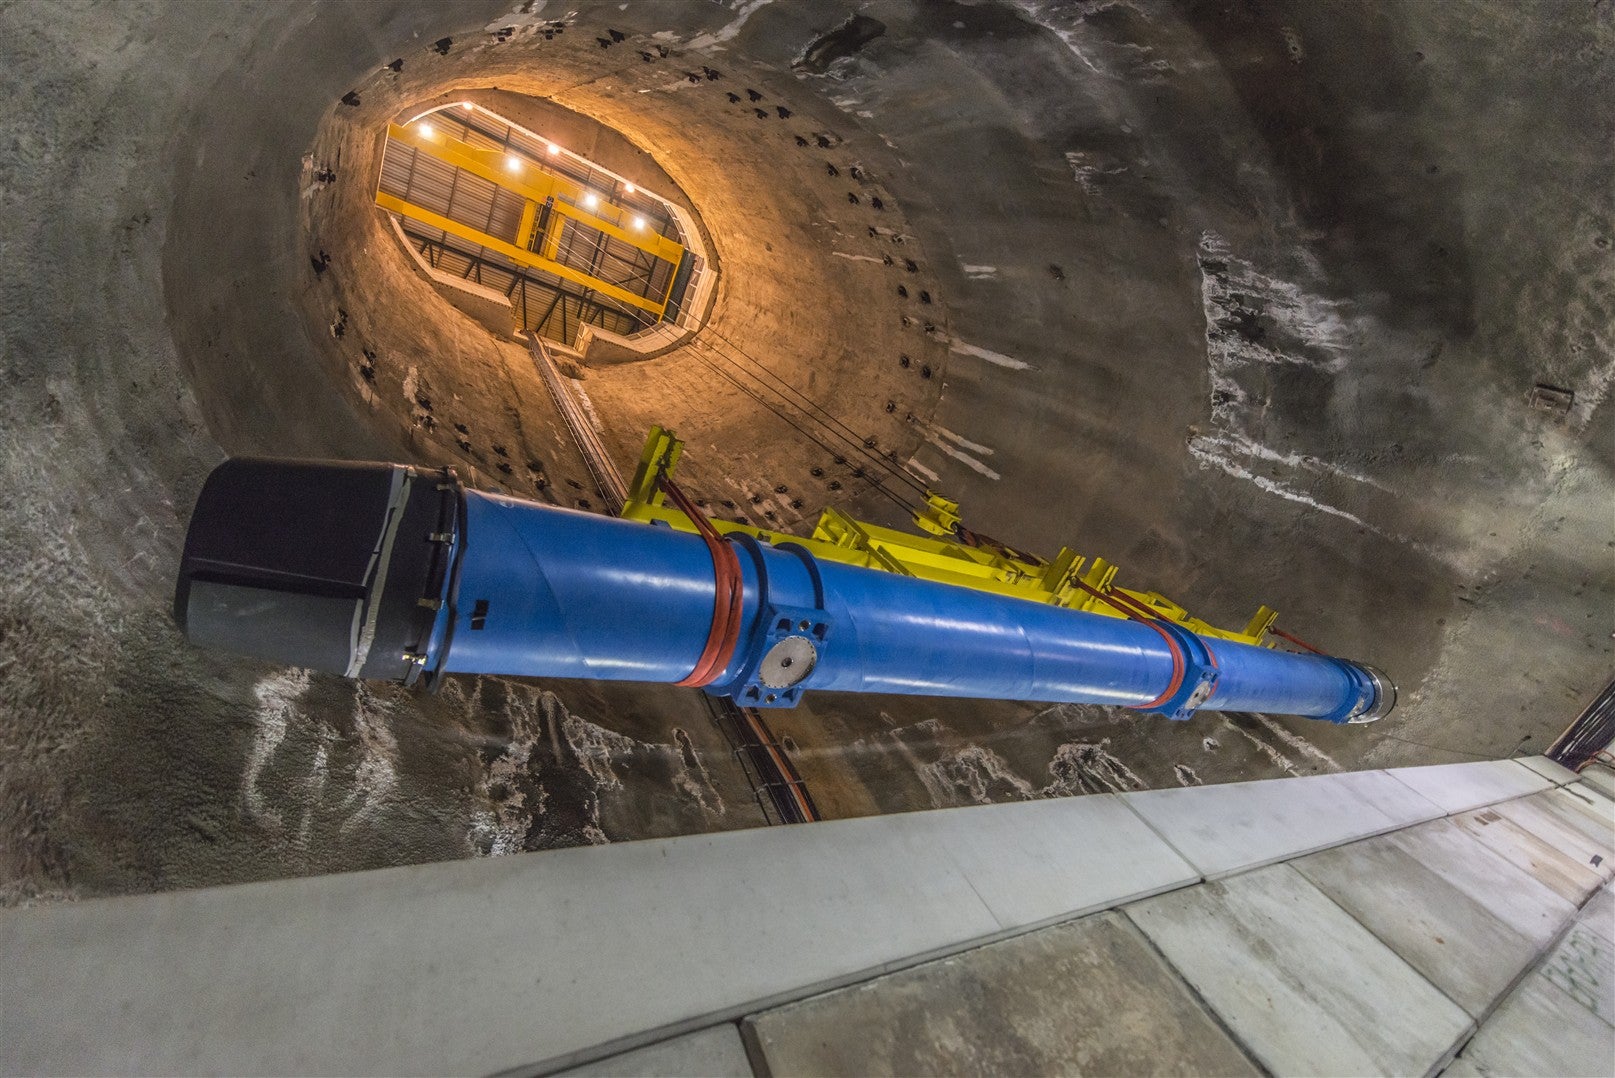 Blue tube-like magnets being lifted by a crane from the Large Hadron Collider during 2013 maintenance